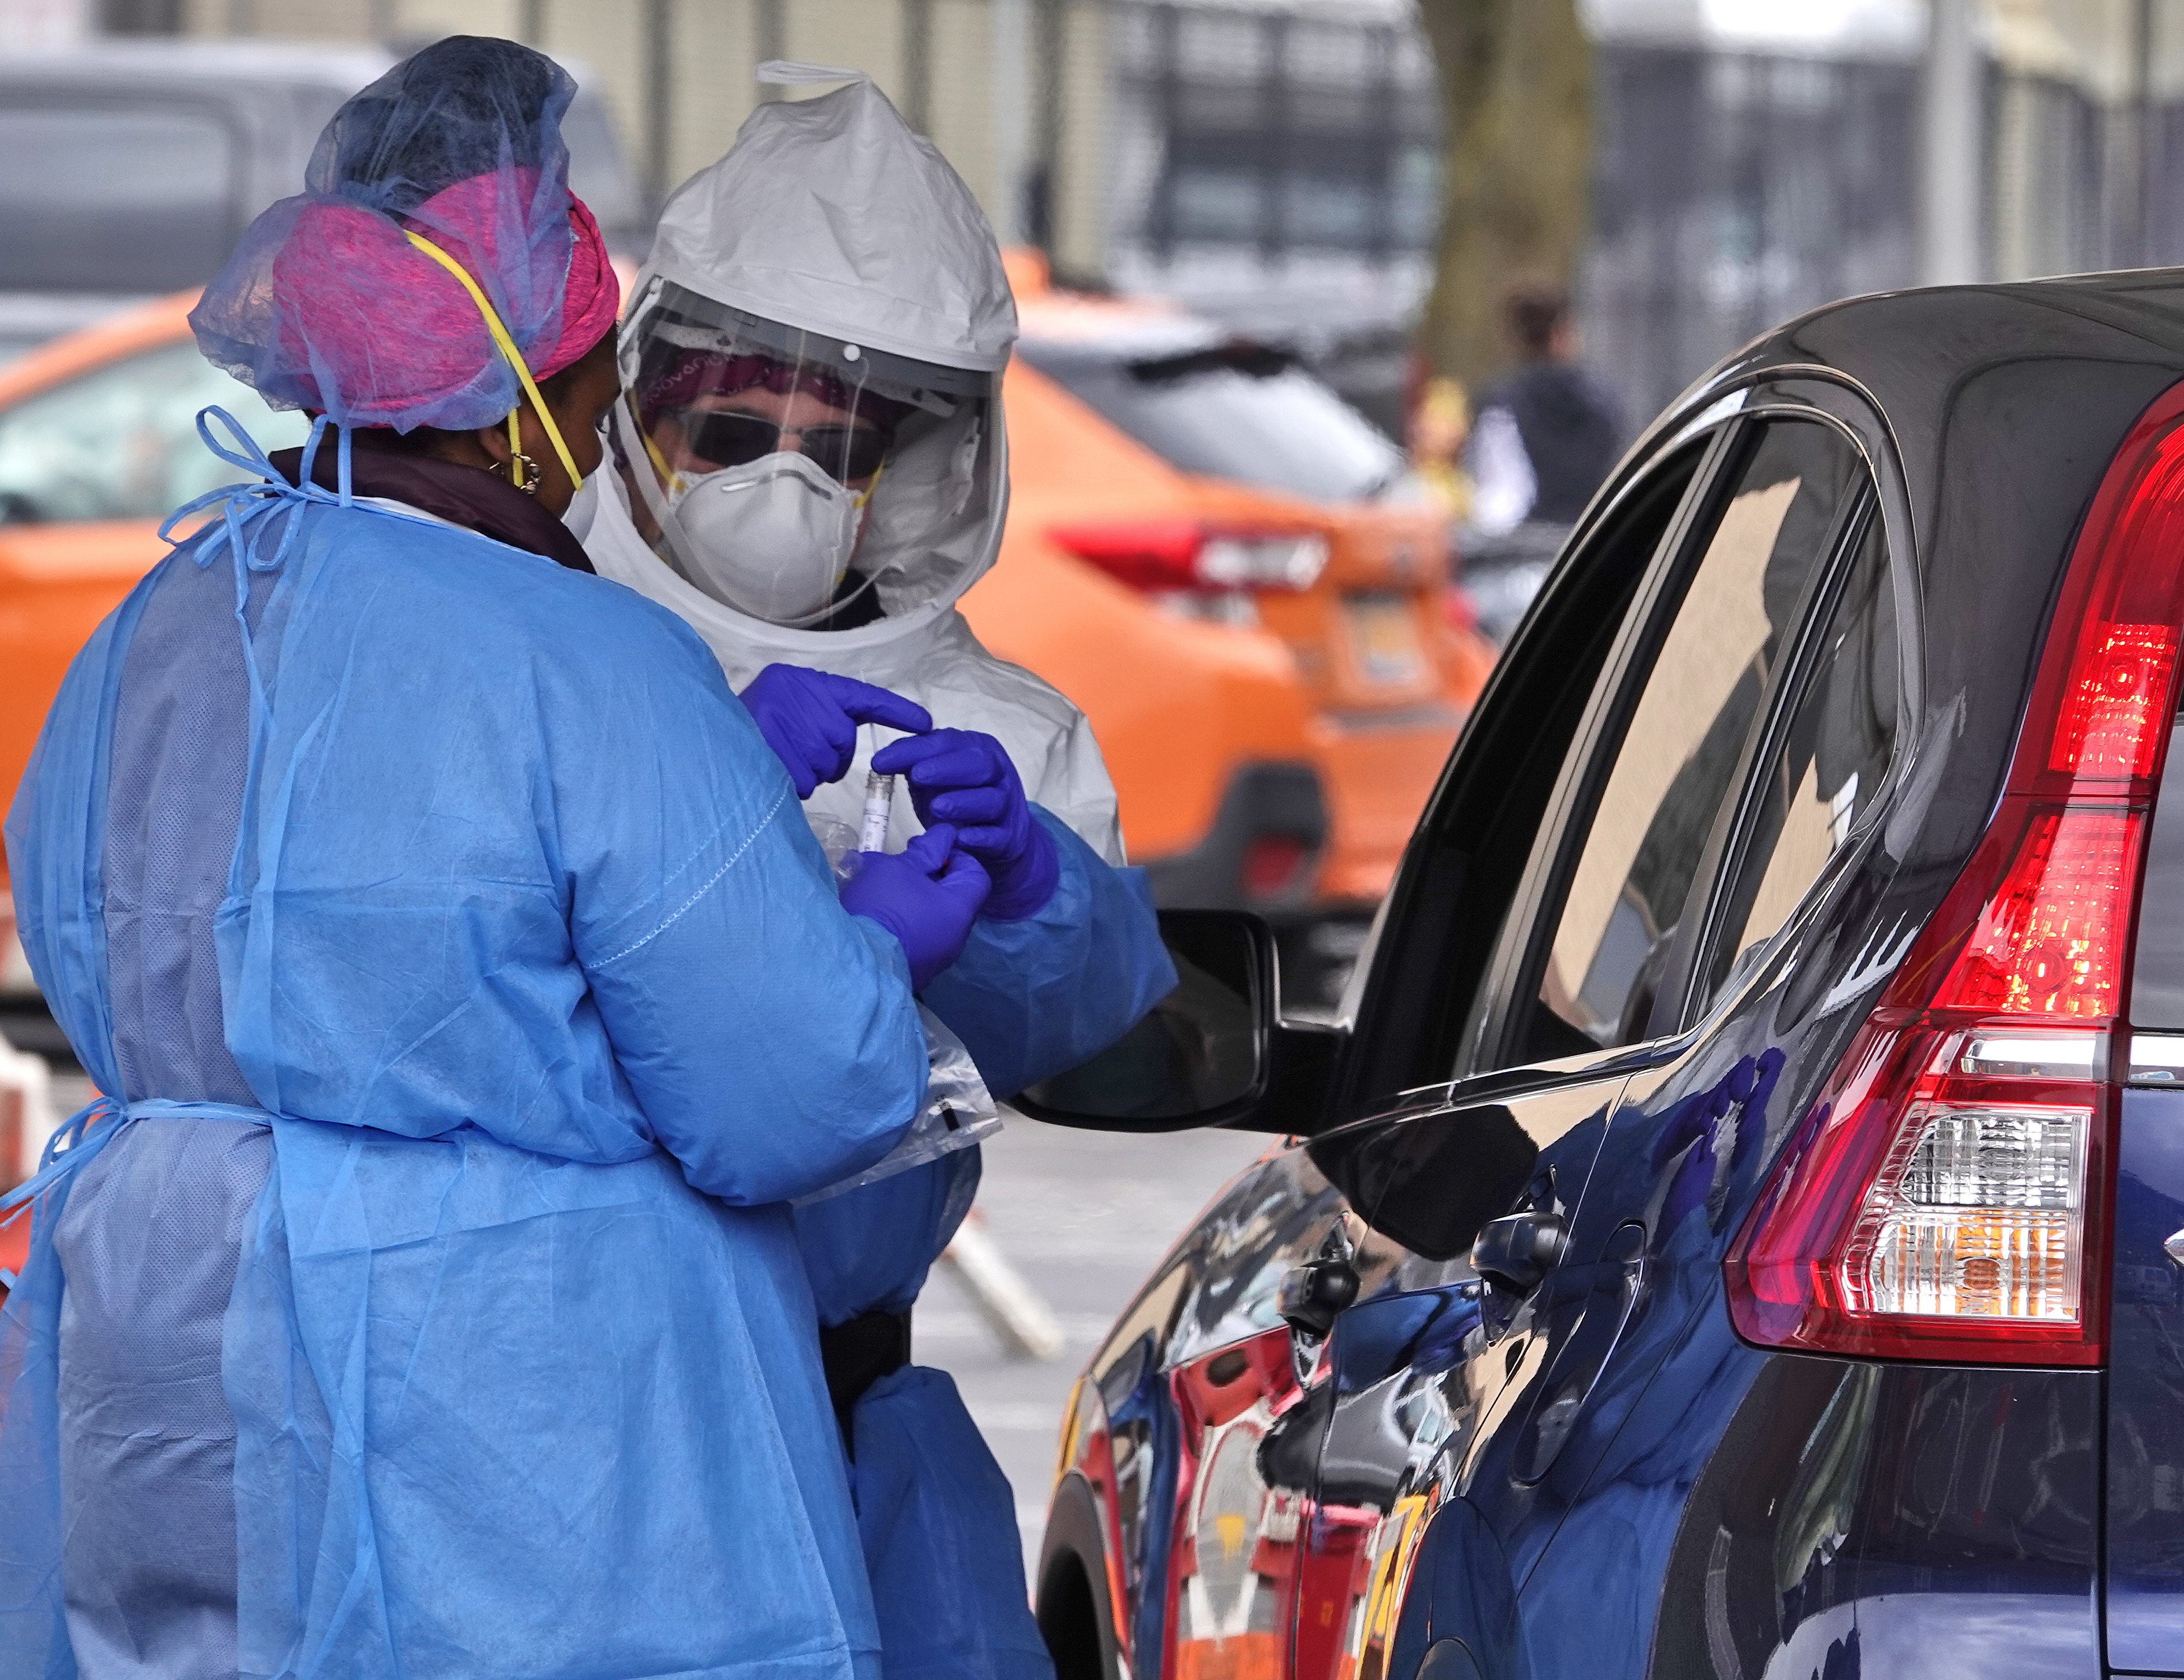 Workers secure a sample taken from a motorist